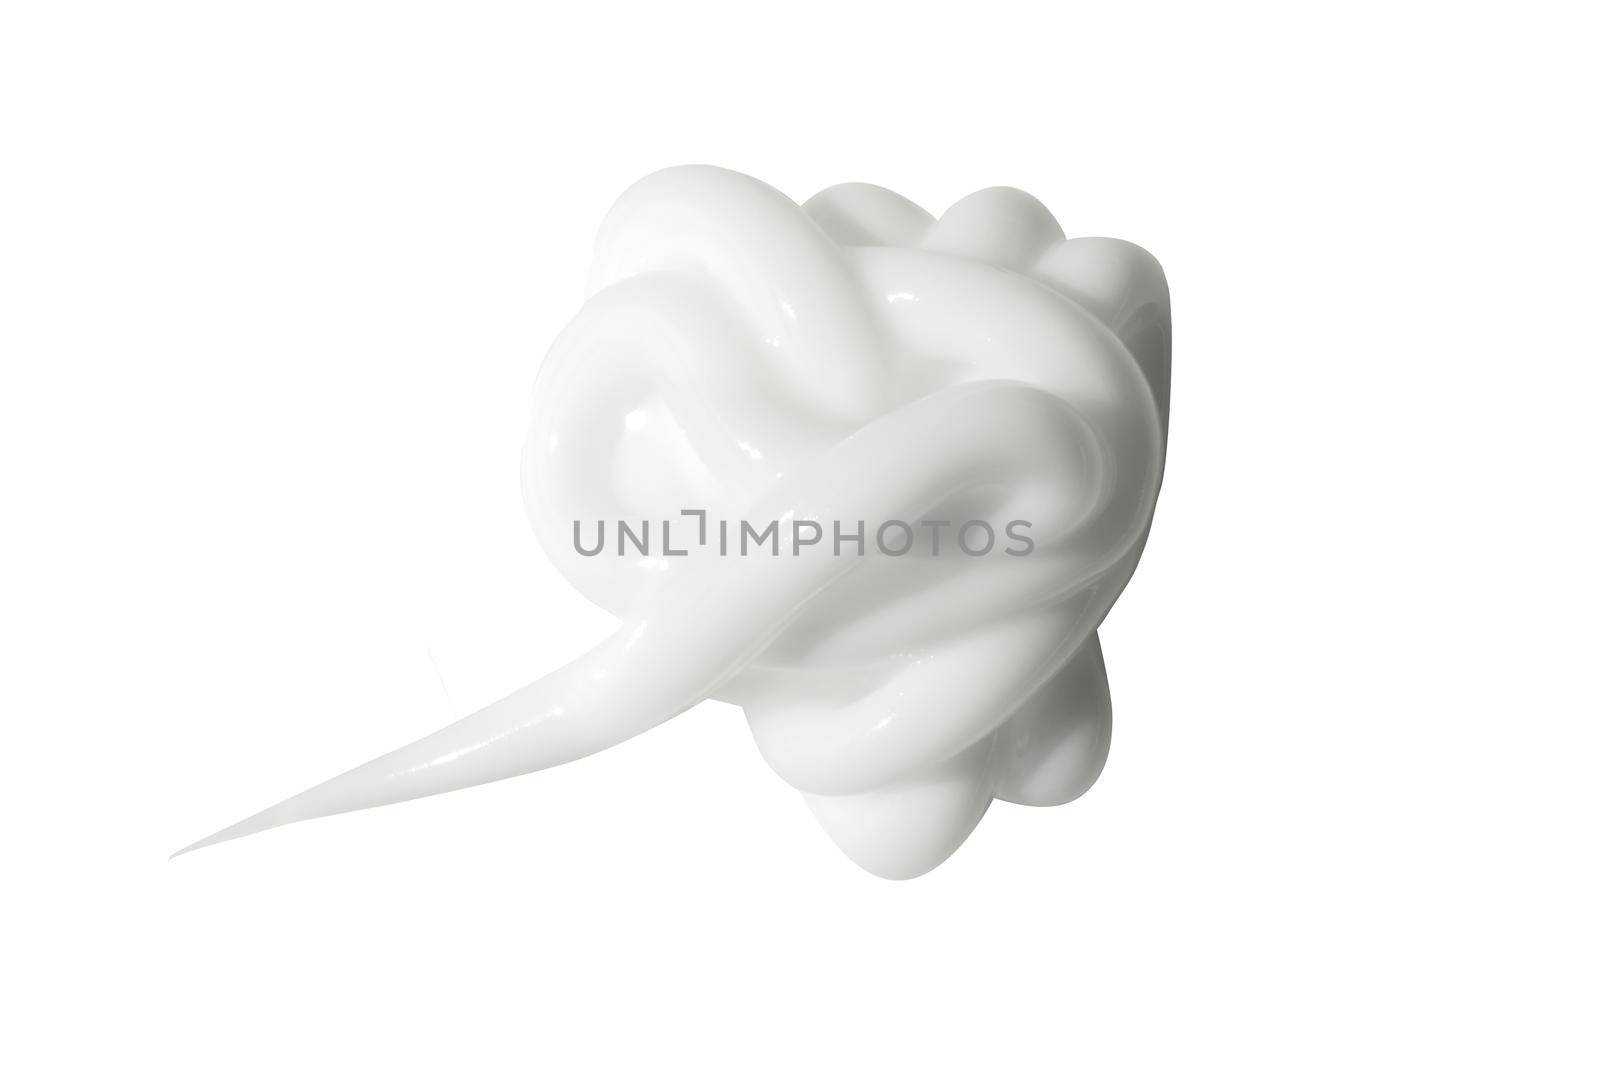 Cream texture swatch stroke squeeze isolated on white background. Facial creme, foam, gel or body lotion skincare make up sample. Photo face makeup cream cosmetic product smear swirl. Macro